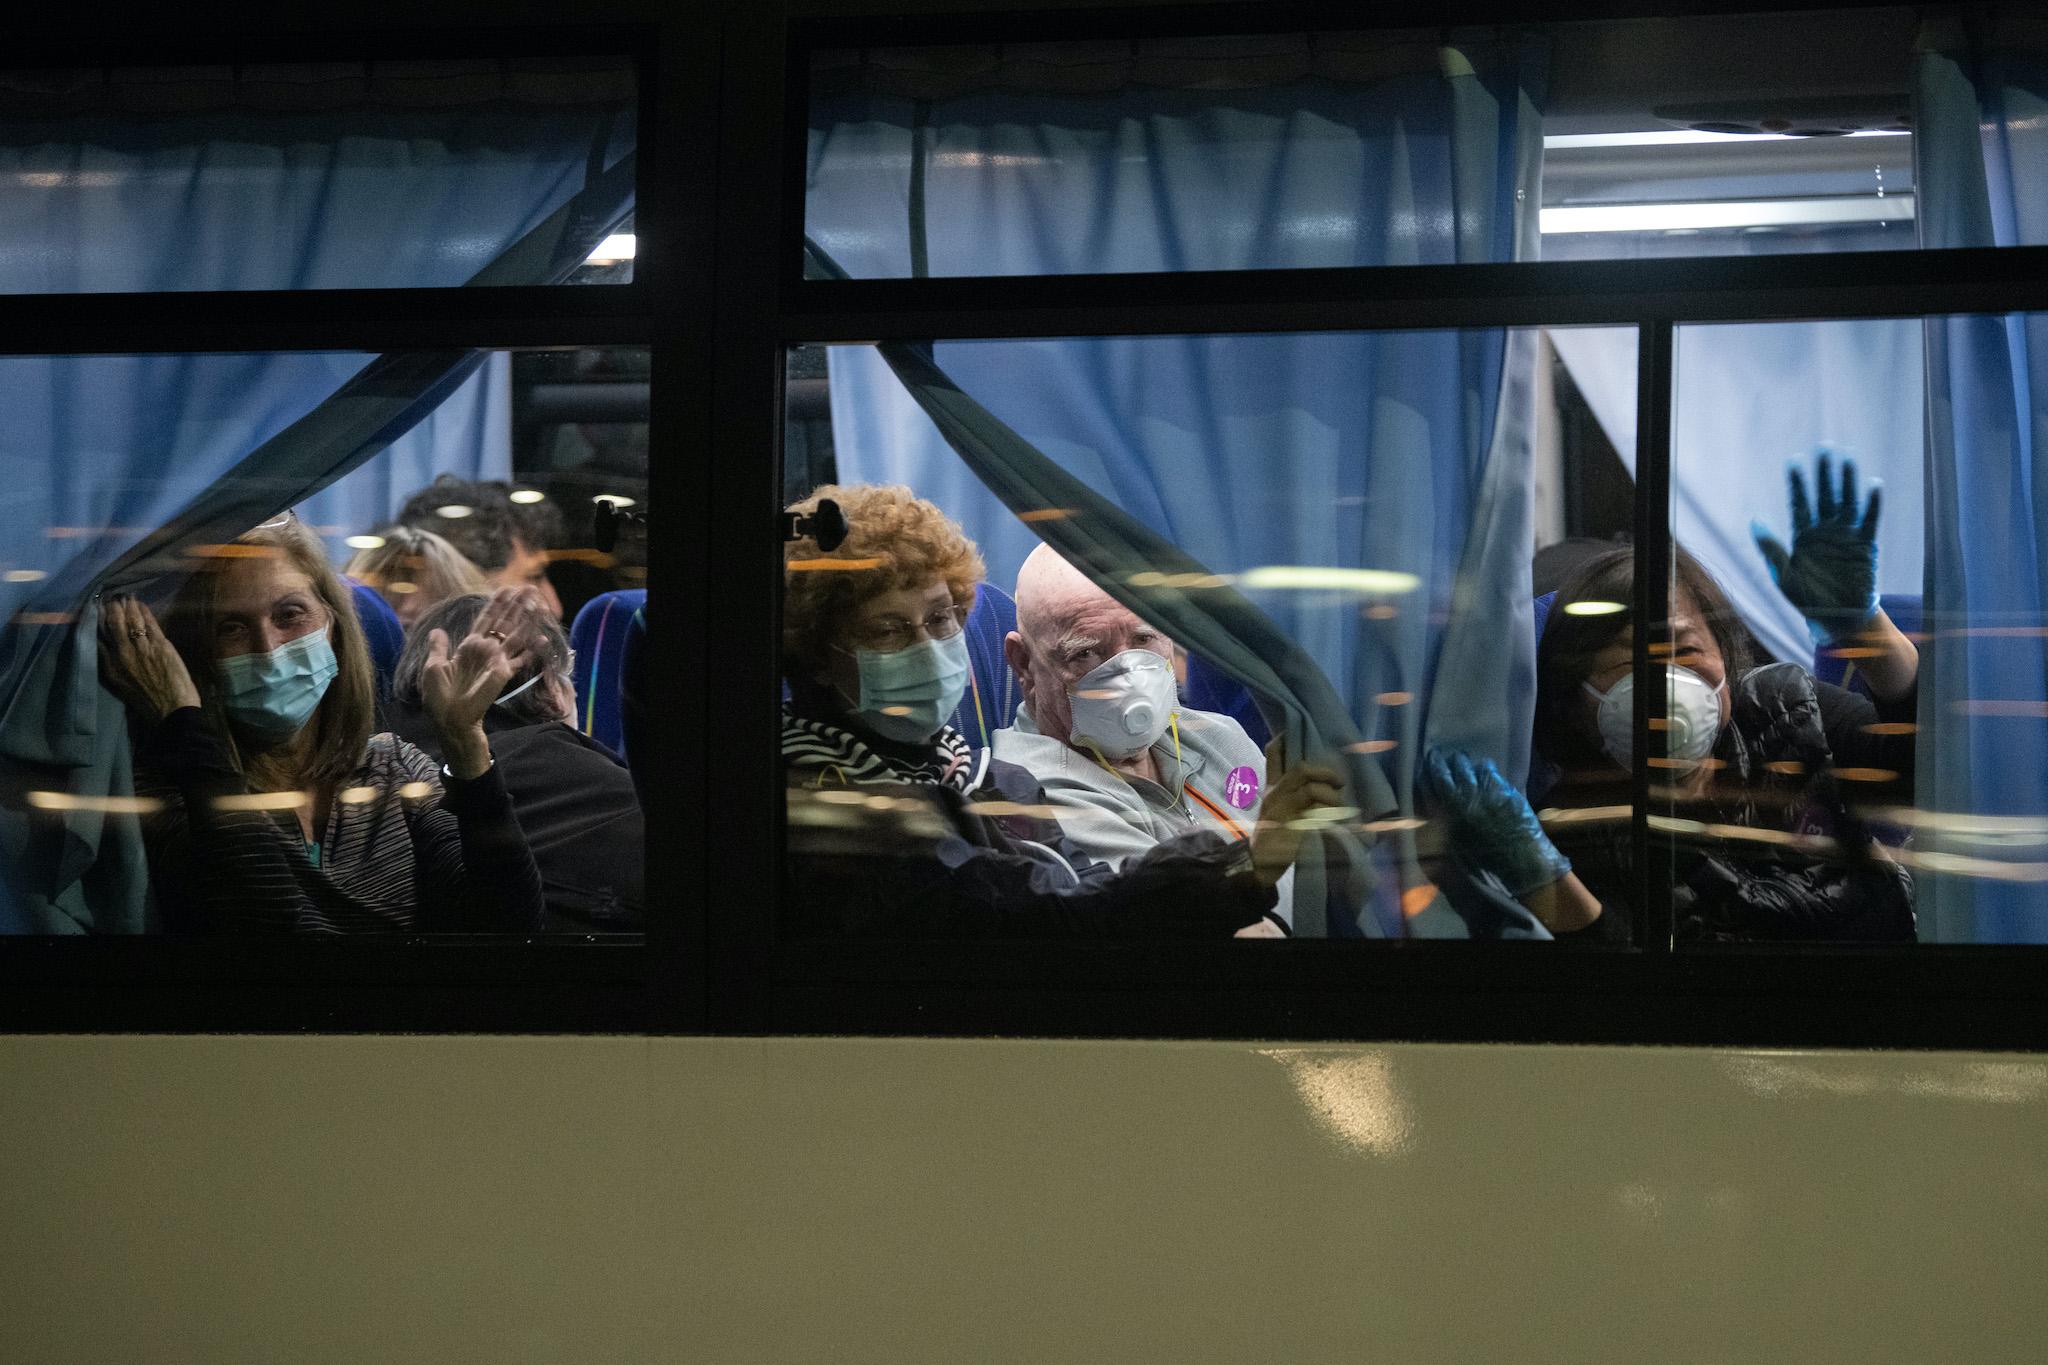 American citizens wave from a bus as they leave the quarantined Diamond Princess cruise ship at Daikoku Pier to be repatriated to the United States on February 17, 2020 in Yokohama, Japan